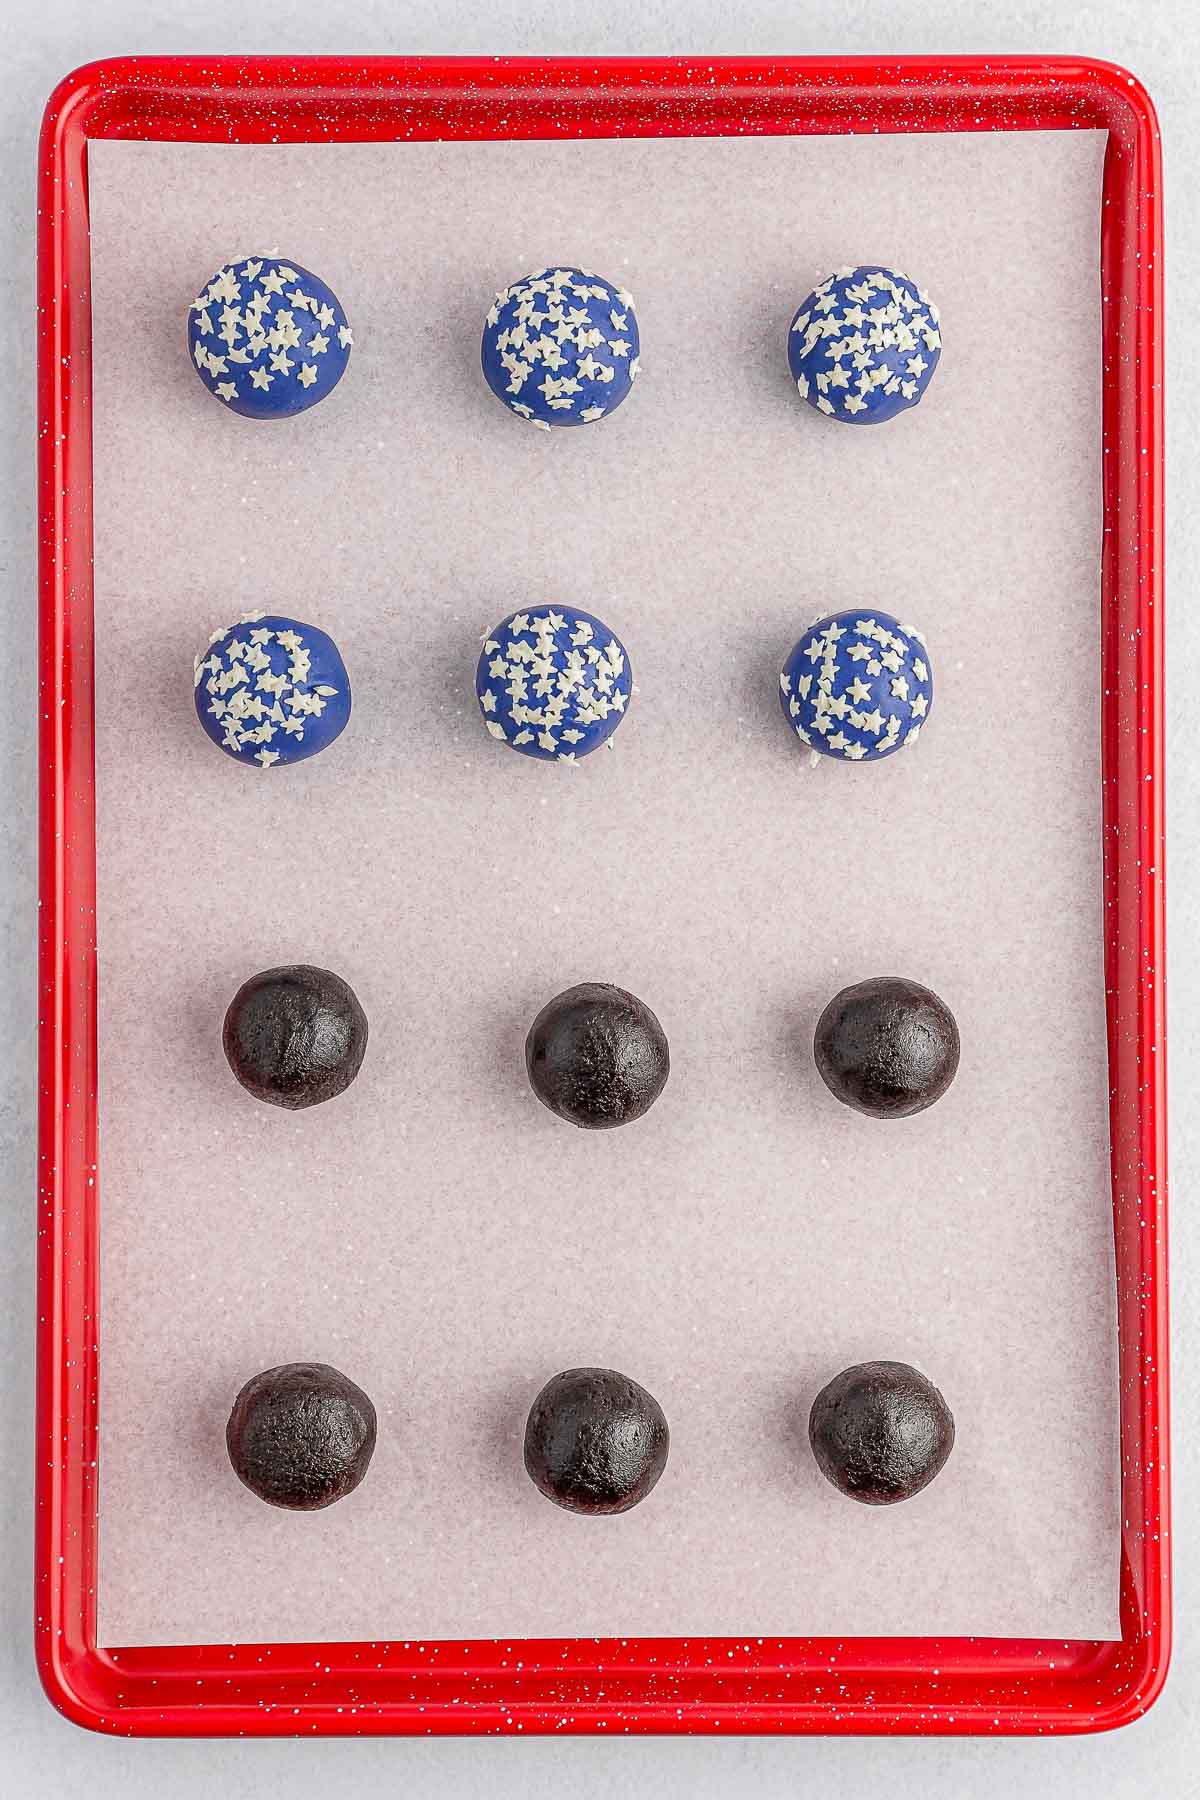 Several blue dipped oreo balls on a red baking sheet.